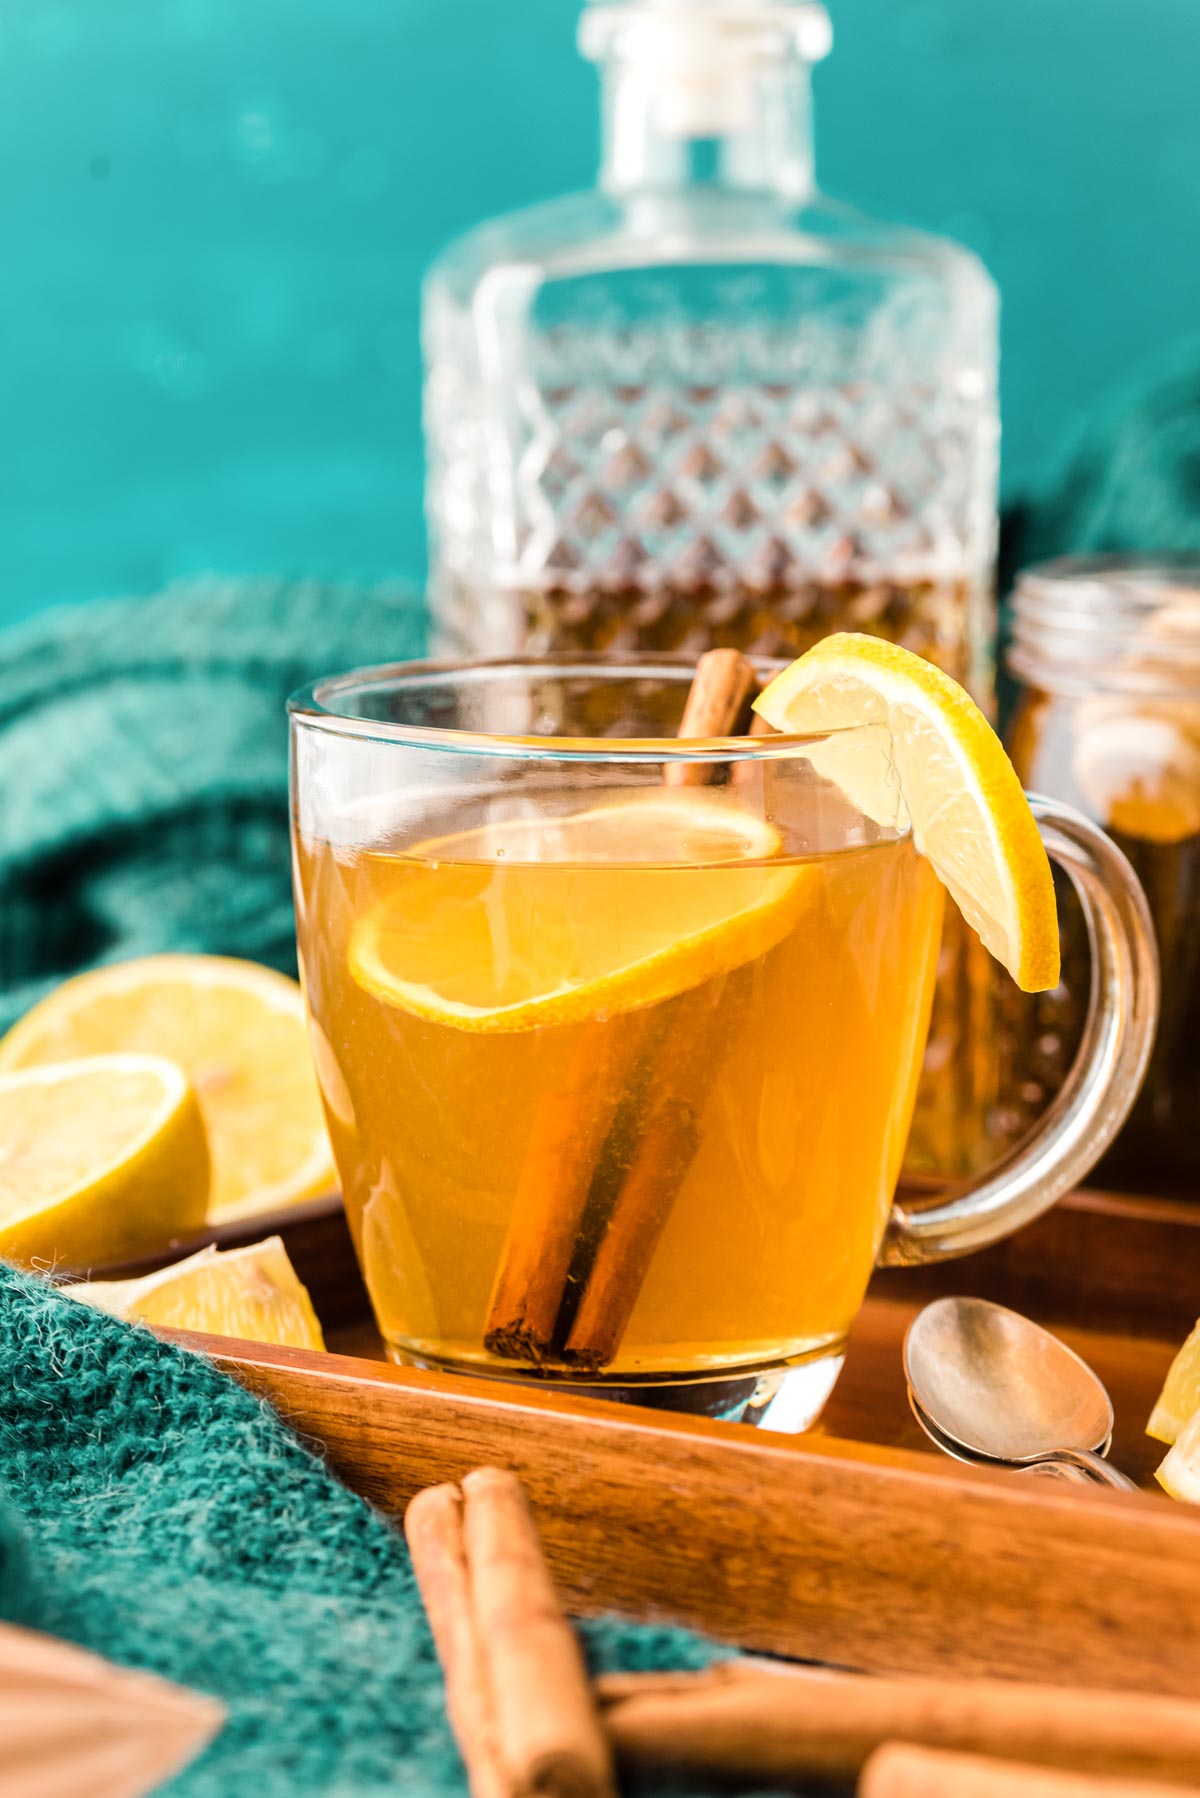 A hot toddy garnished with lemon in a clear glass mug on a wooden tray.